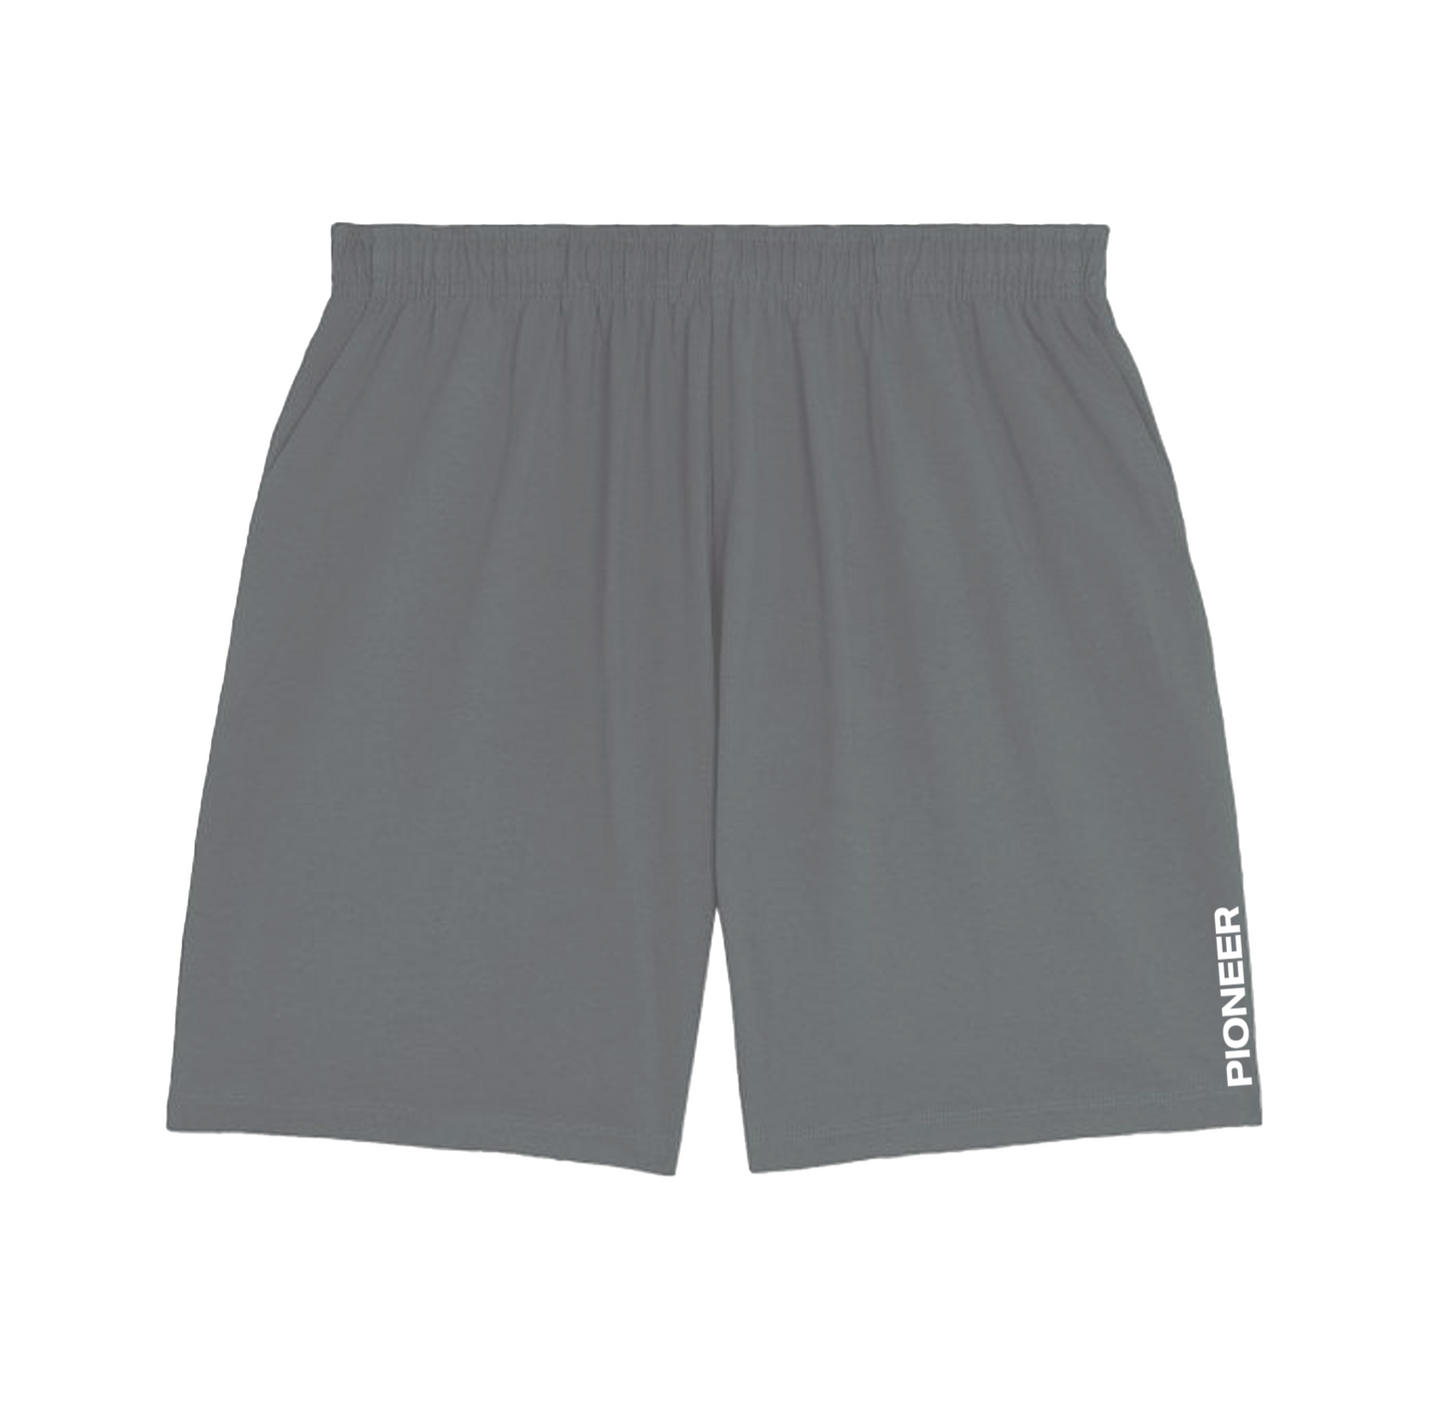 Pioneer All Day Recycled Shorts